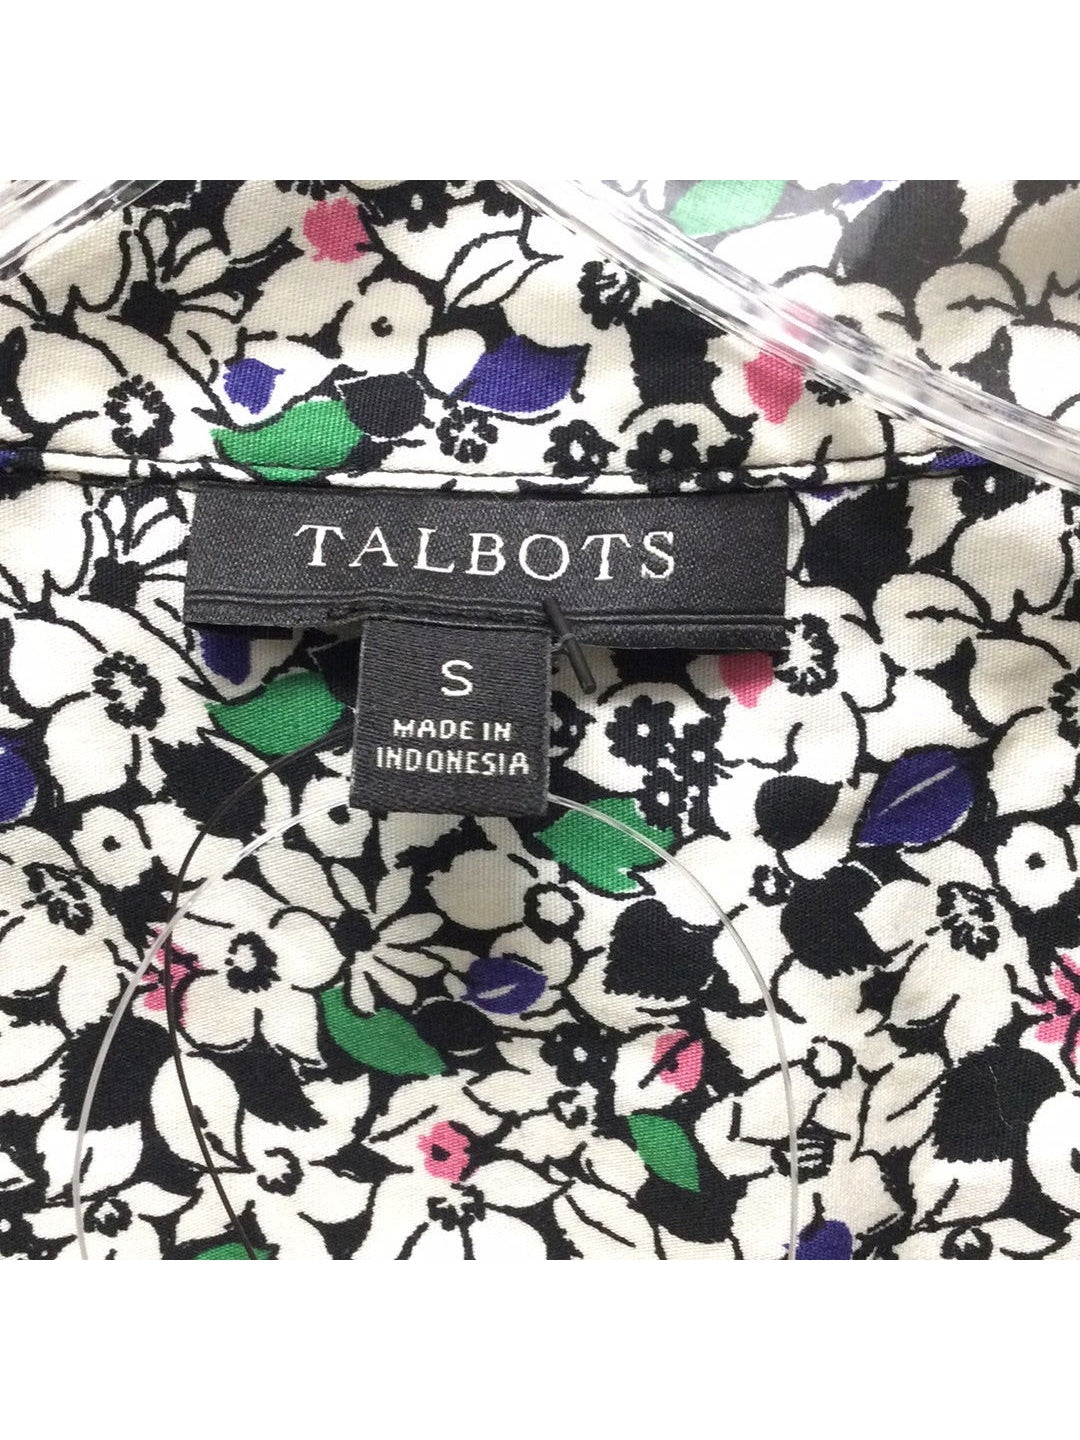 Talbots Ladies Small Multi Color Sleeveless Flower Blouse - The Kennedy Collective Thrift - 